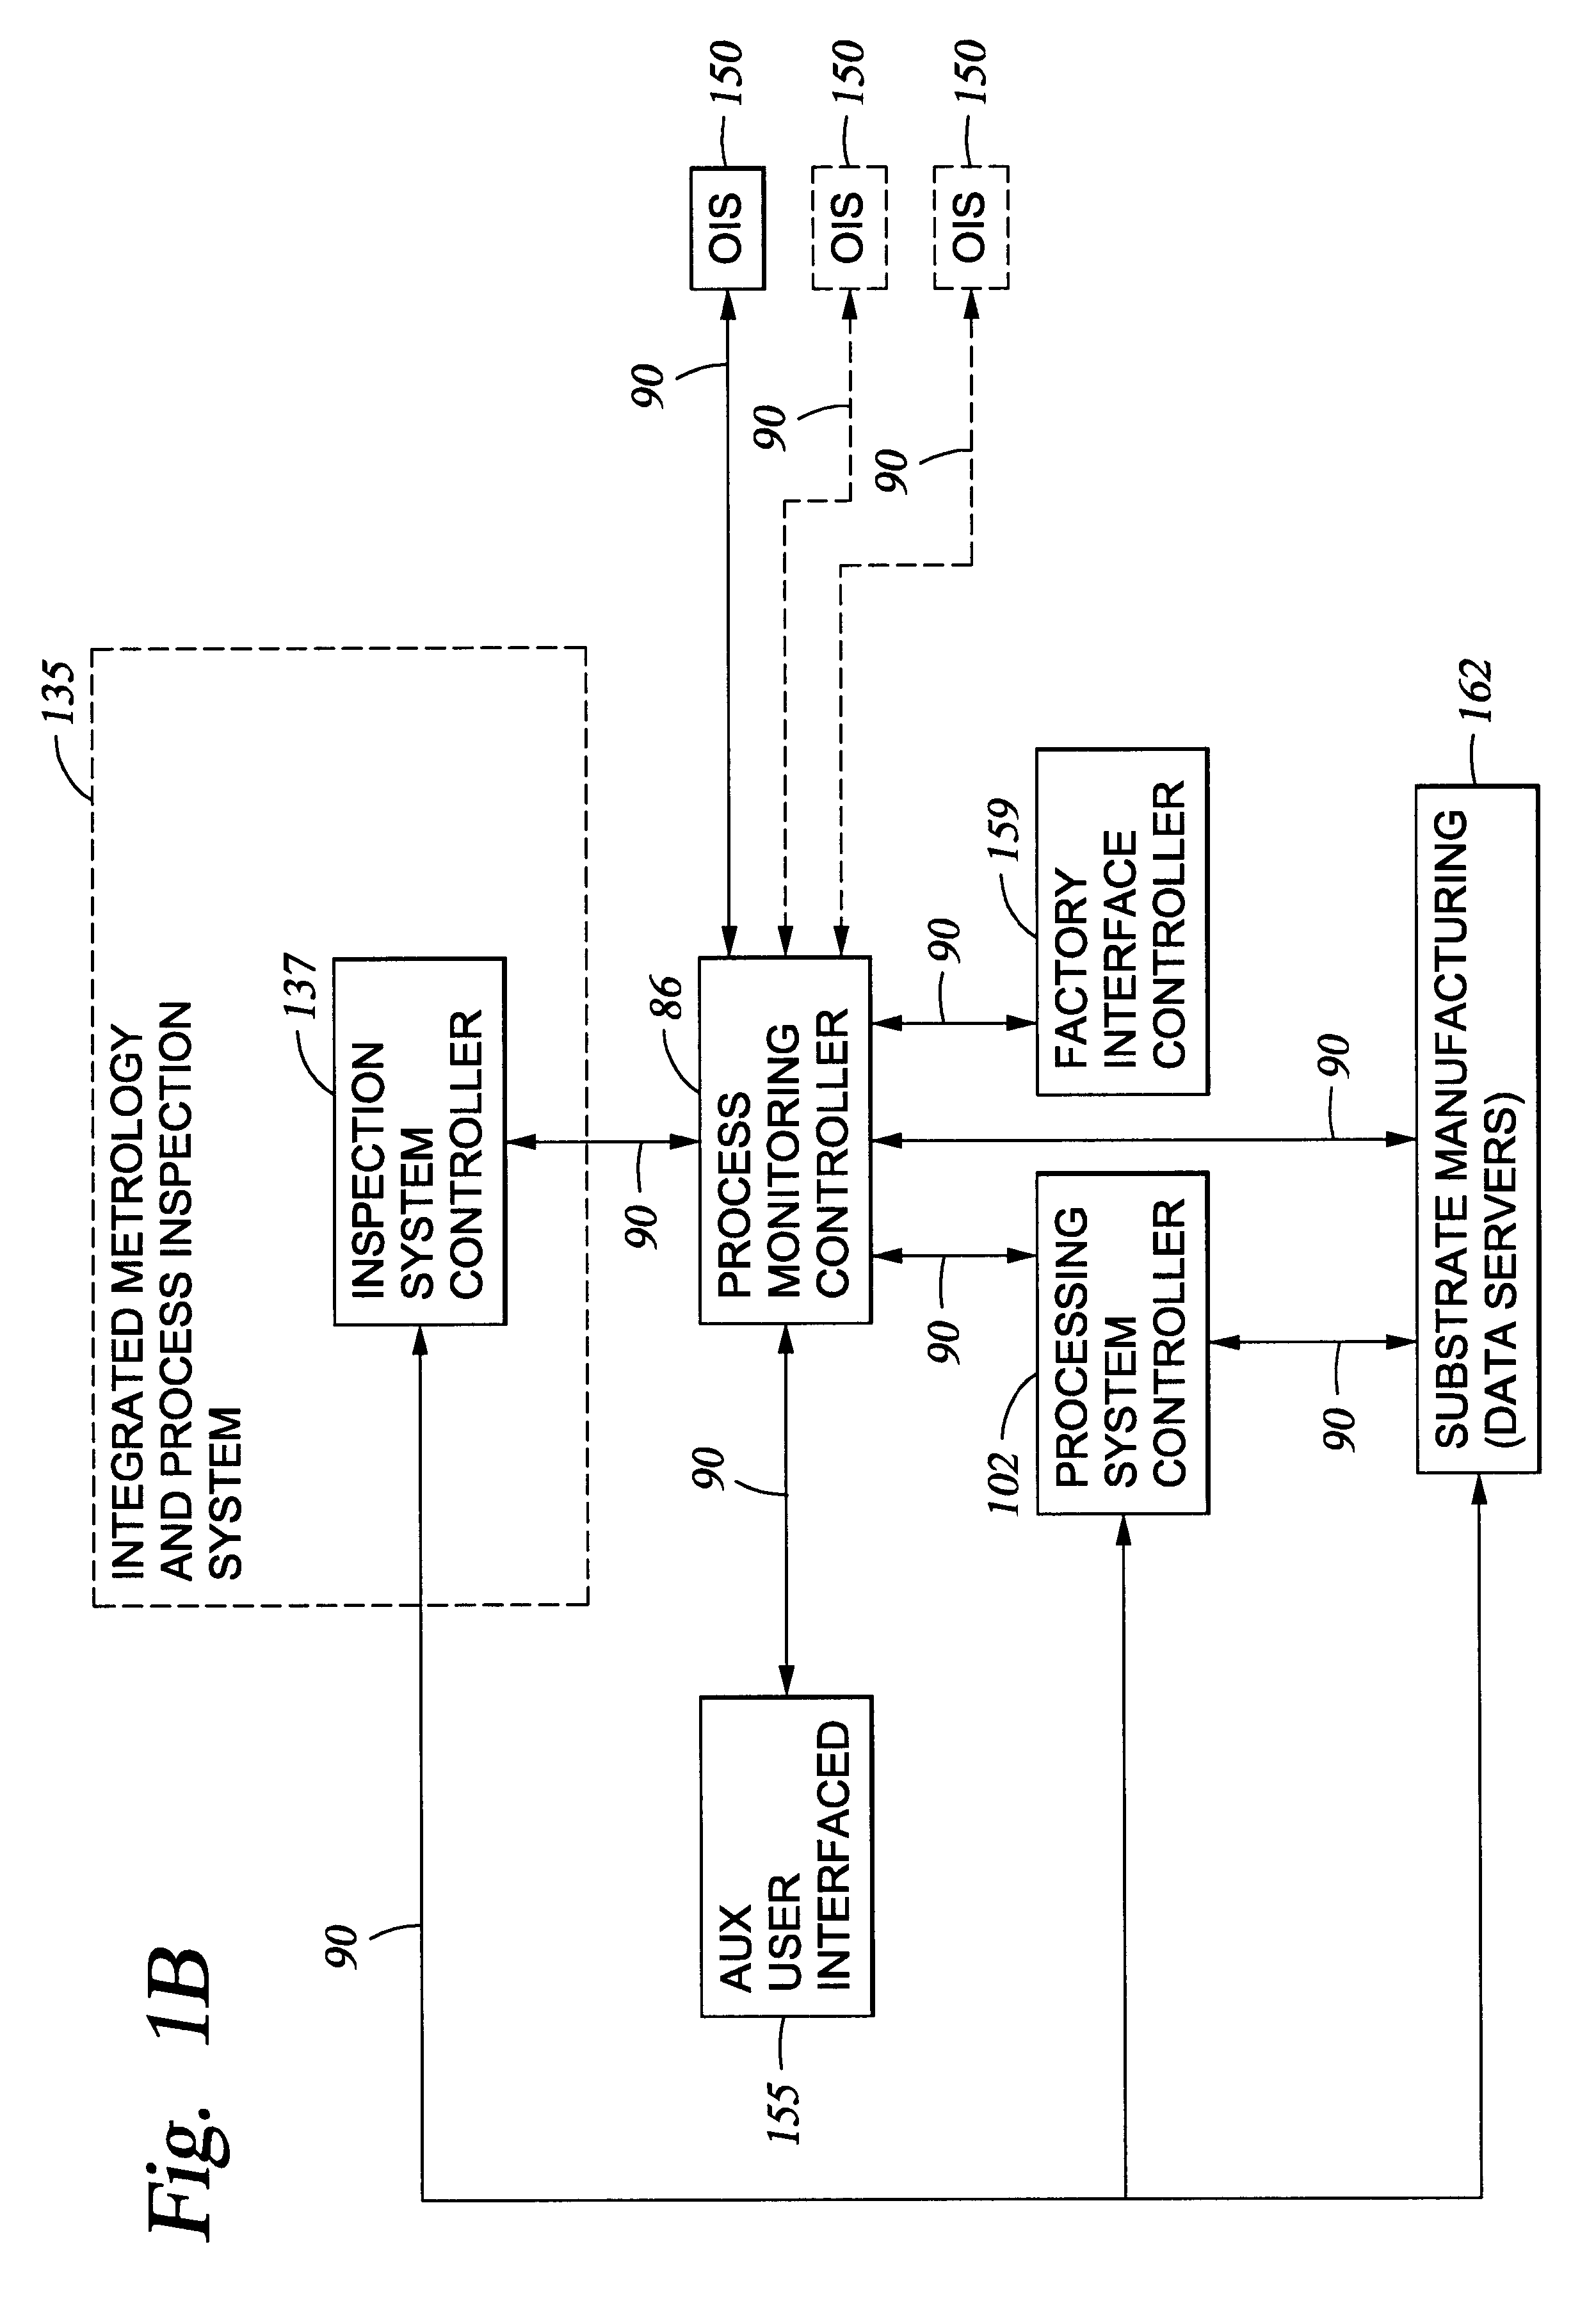 Method and apparatus for embedded substrate and system status monitoring